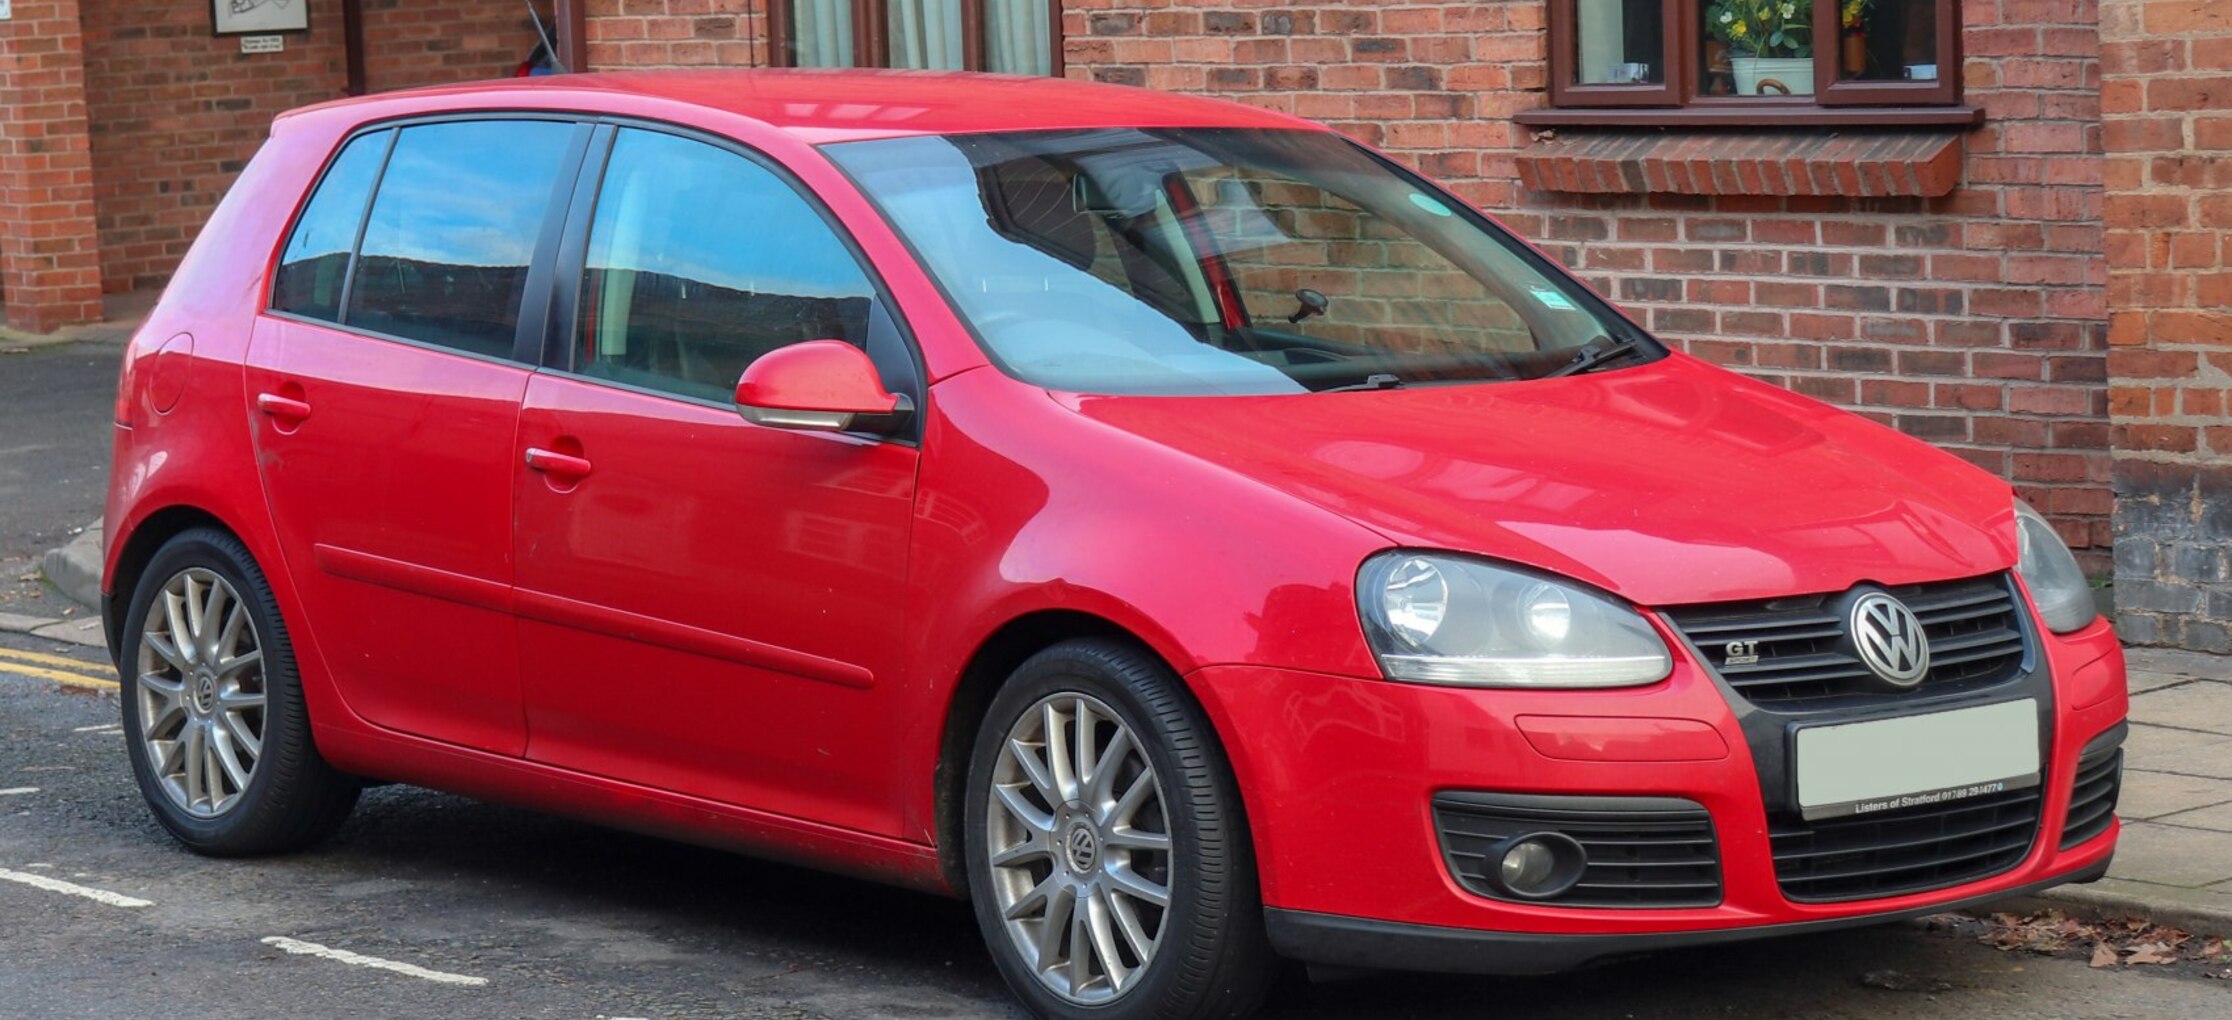 Volkswagen Golf V 2.0 GTI TFSI (200 Hp) 2004, 2005, 2006, 2007, 2008  specifications, prices & reviews